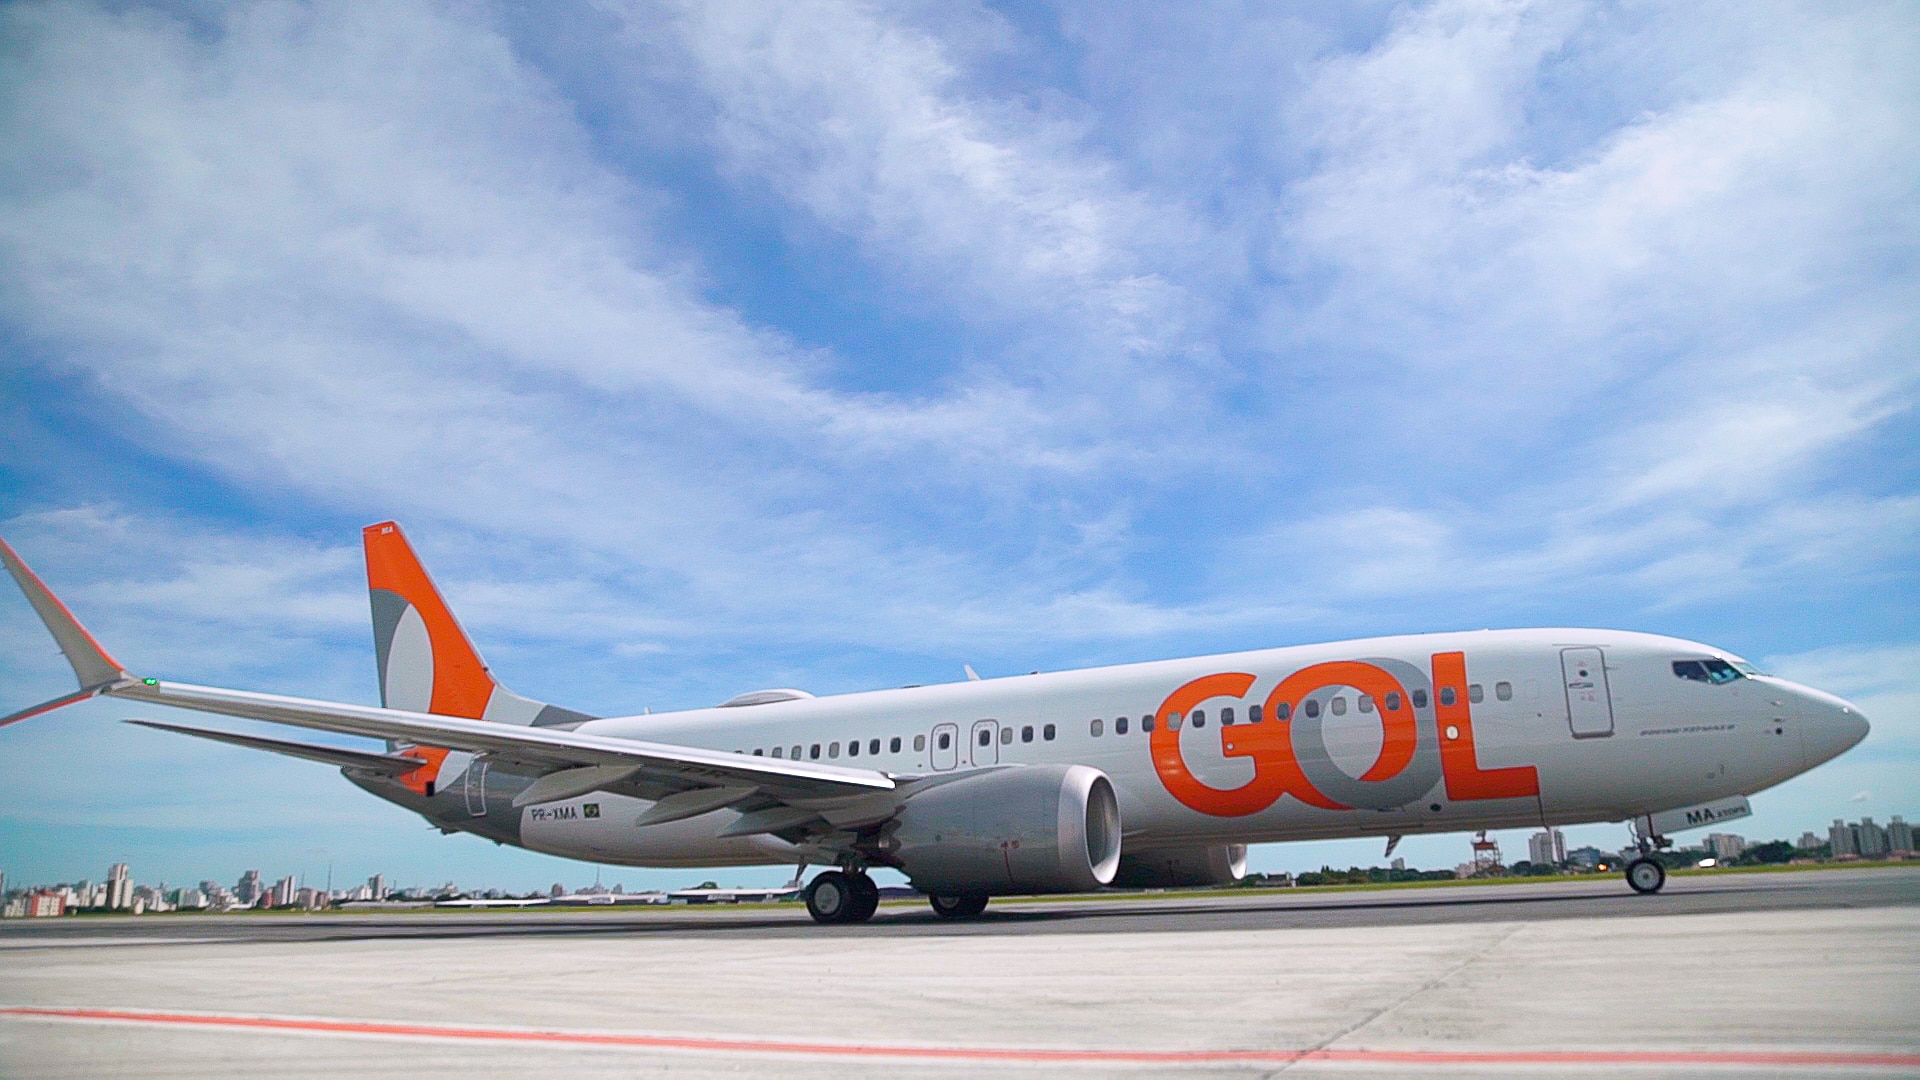 The Best Tips For Flying With GOL Airlines